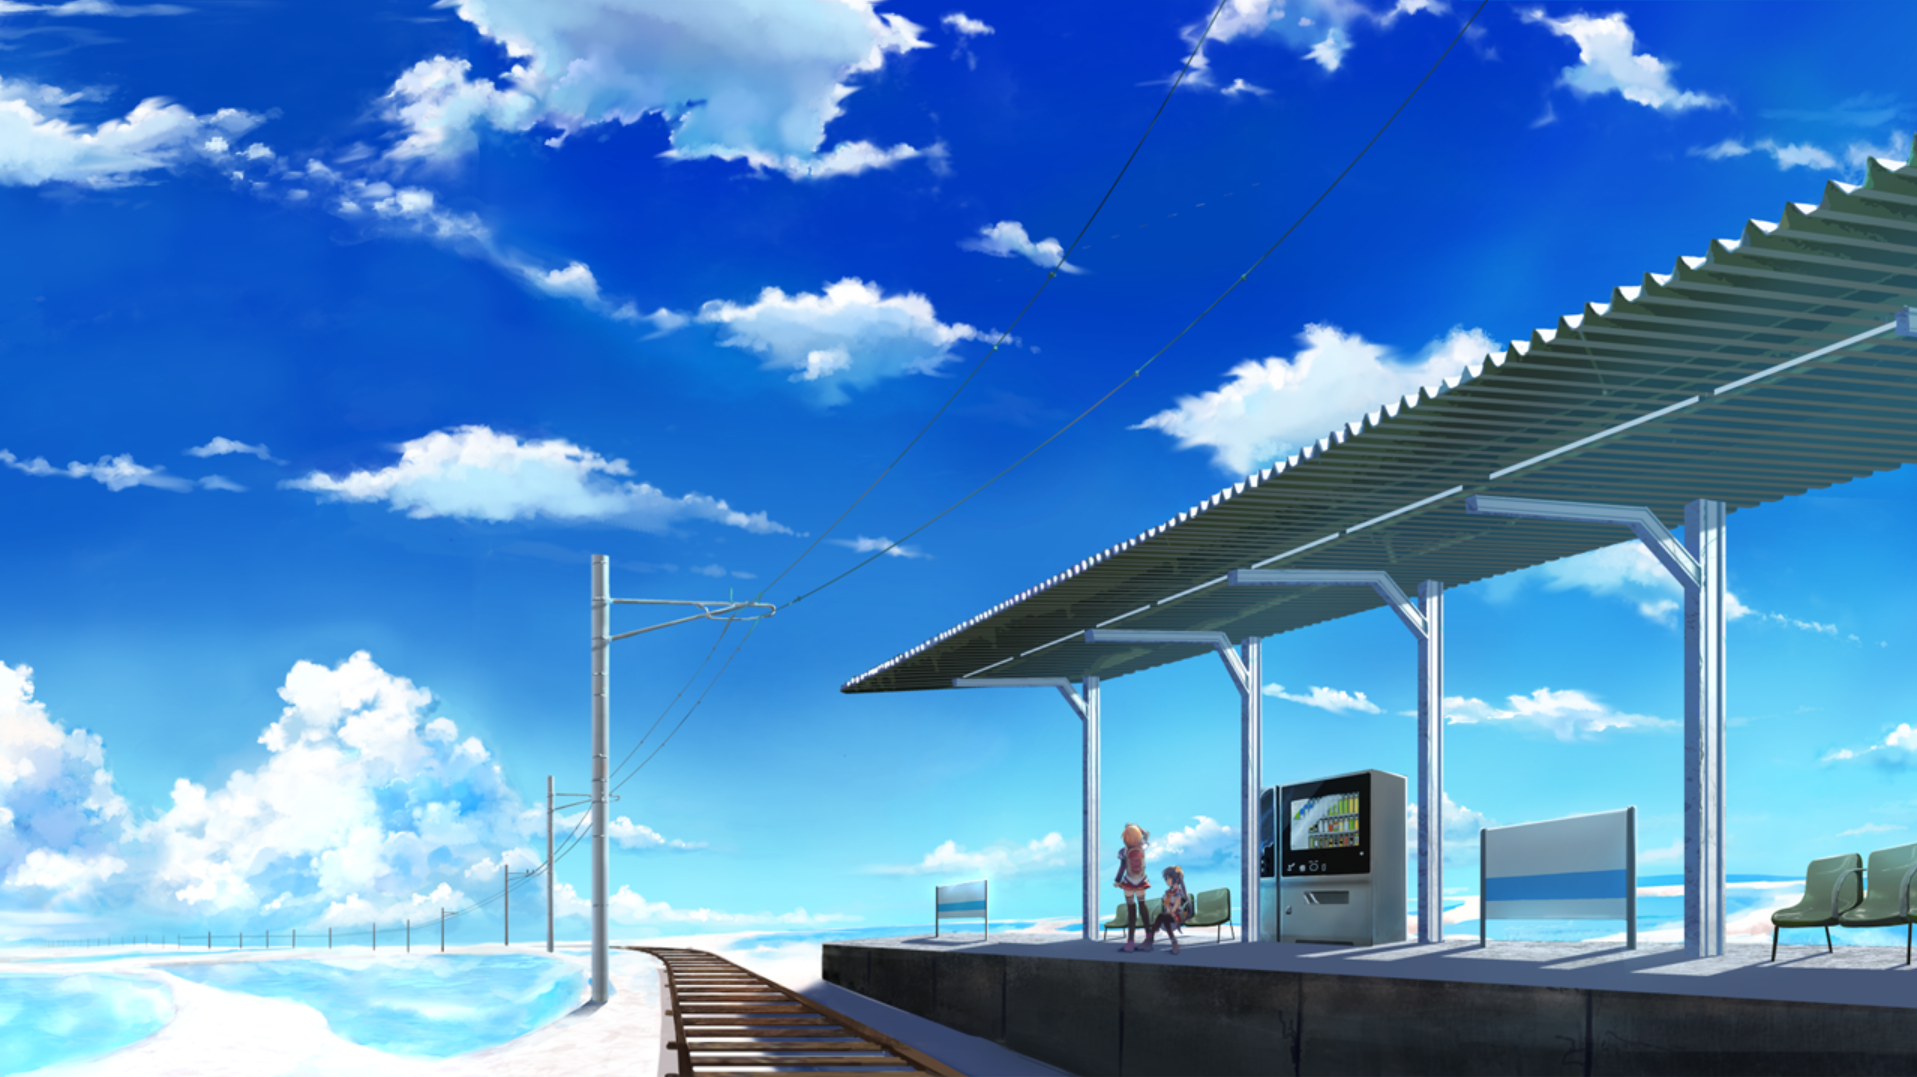 Camus In The Blue Sky Sky Galgame Clouds Anime Girls Sitting Bench Standing Backpacks Railway Vendin 1917x1077